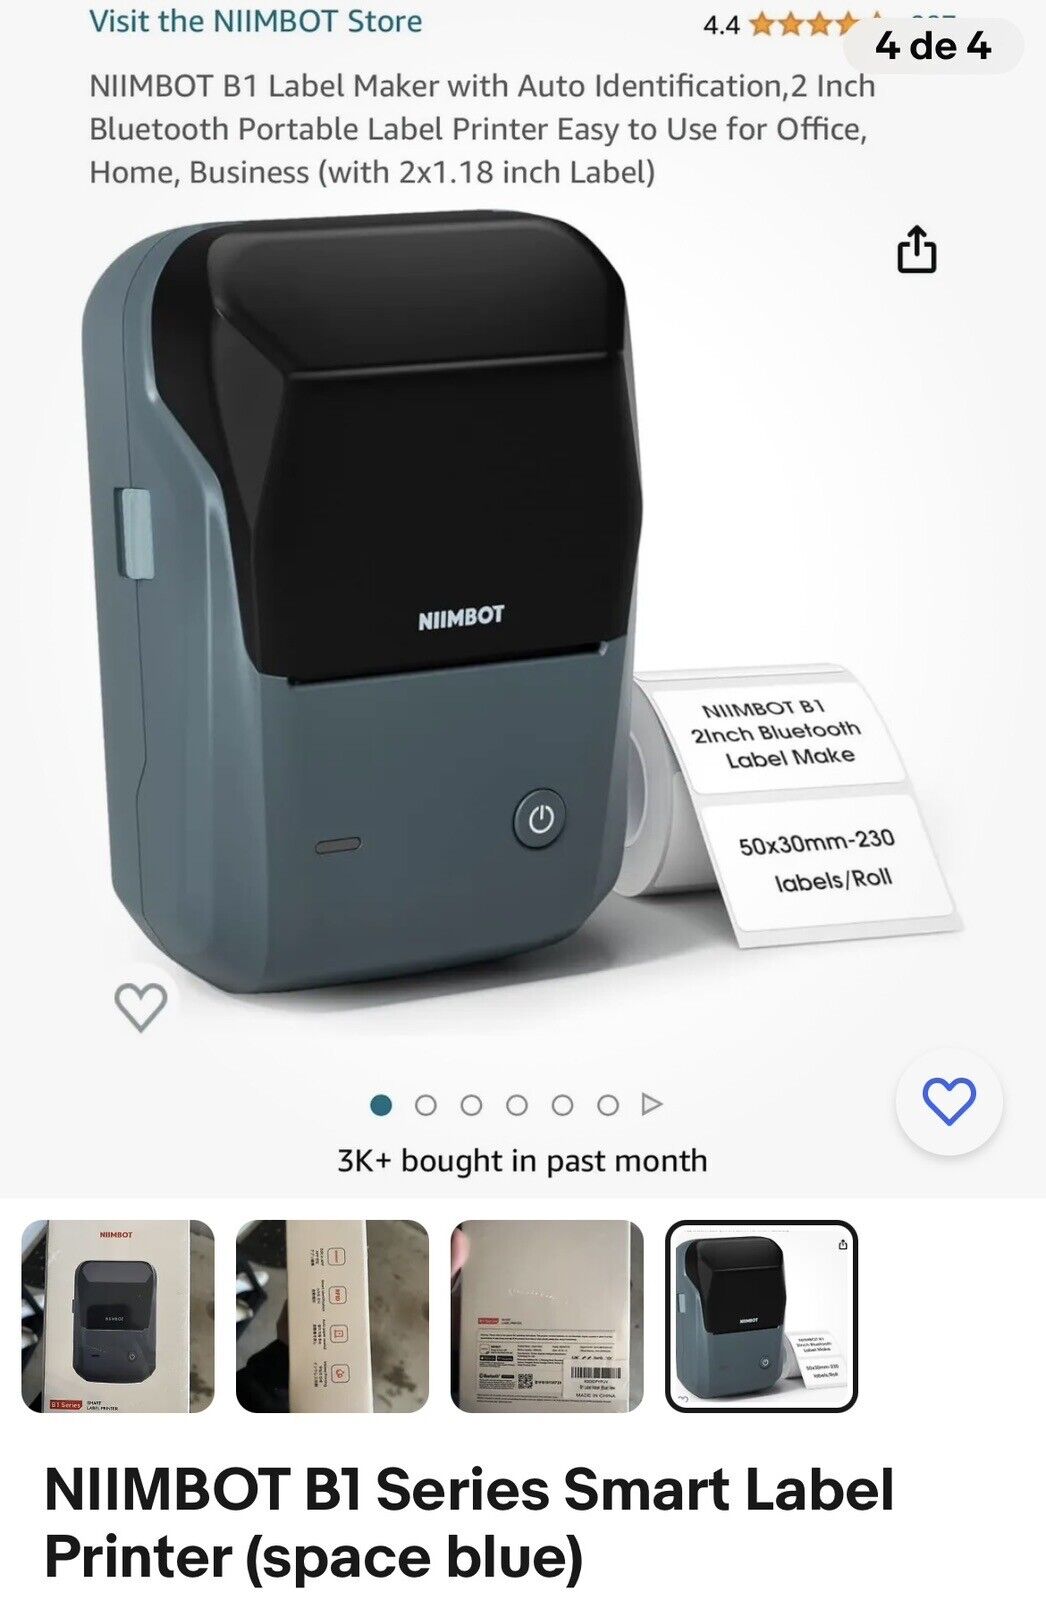 Open Box NIIMBOT B1 Bluetooth Label Printer With a Roll Of Label